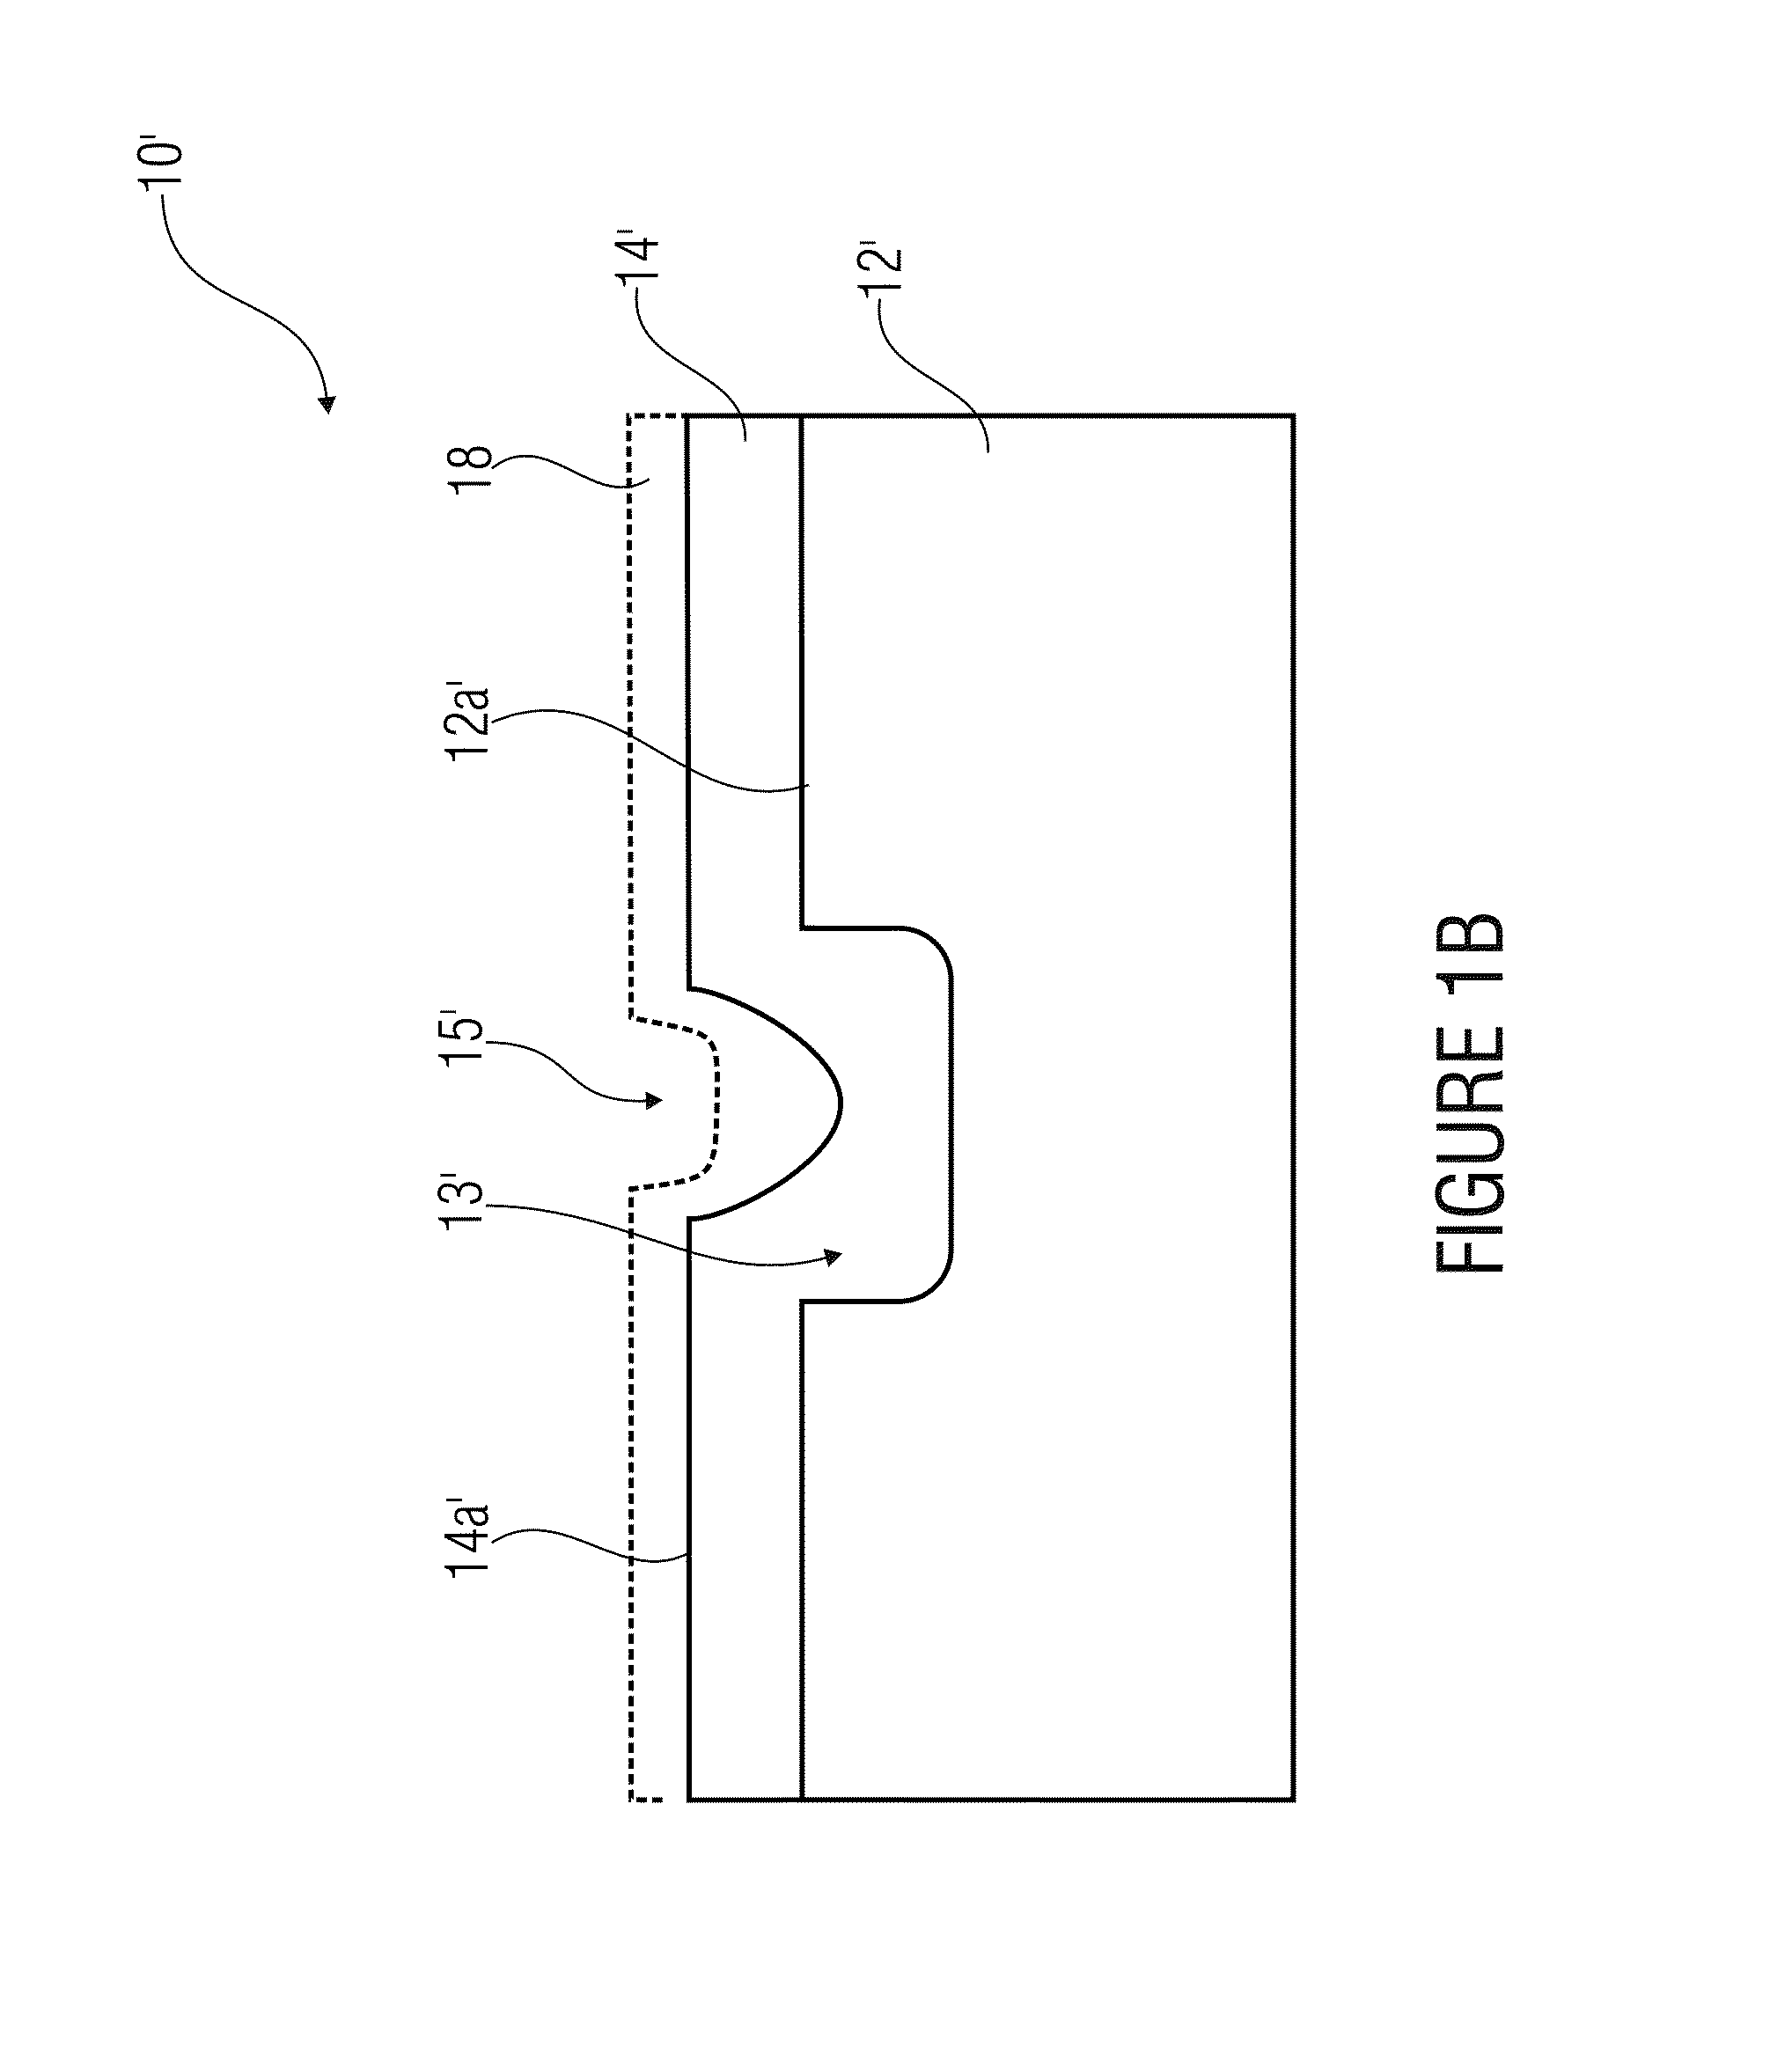 Optical element and production of same